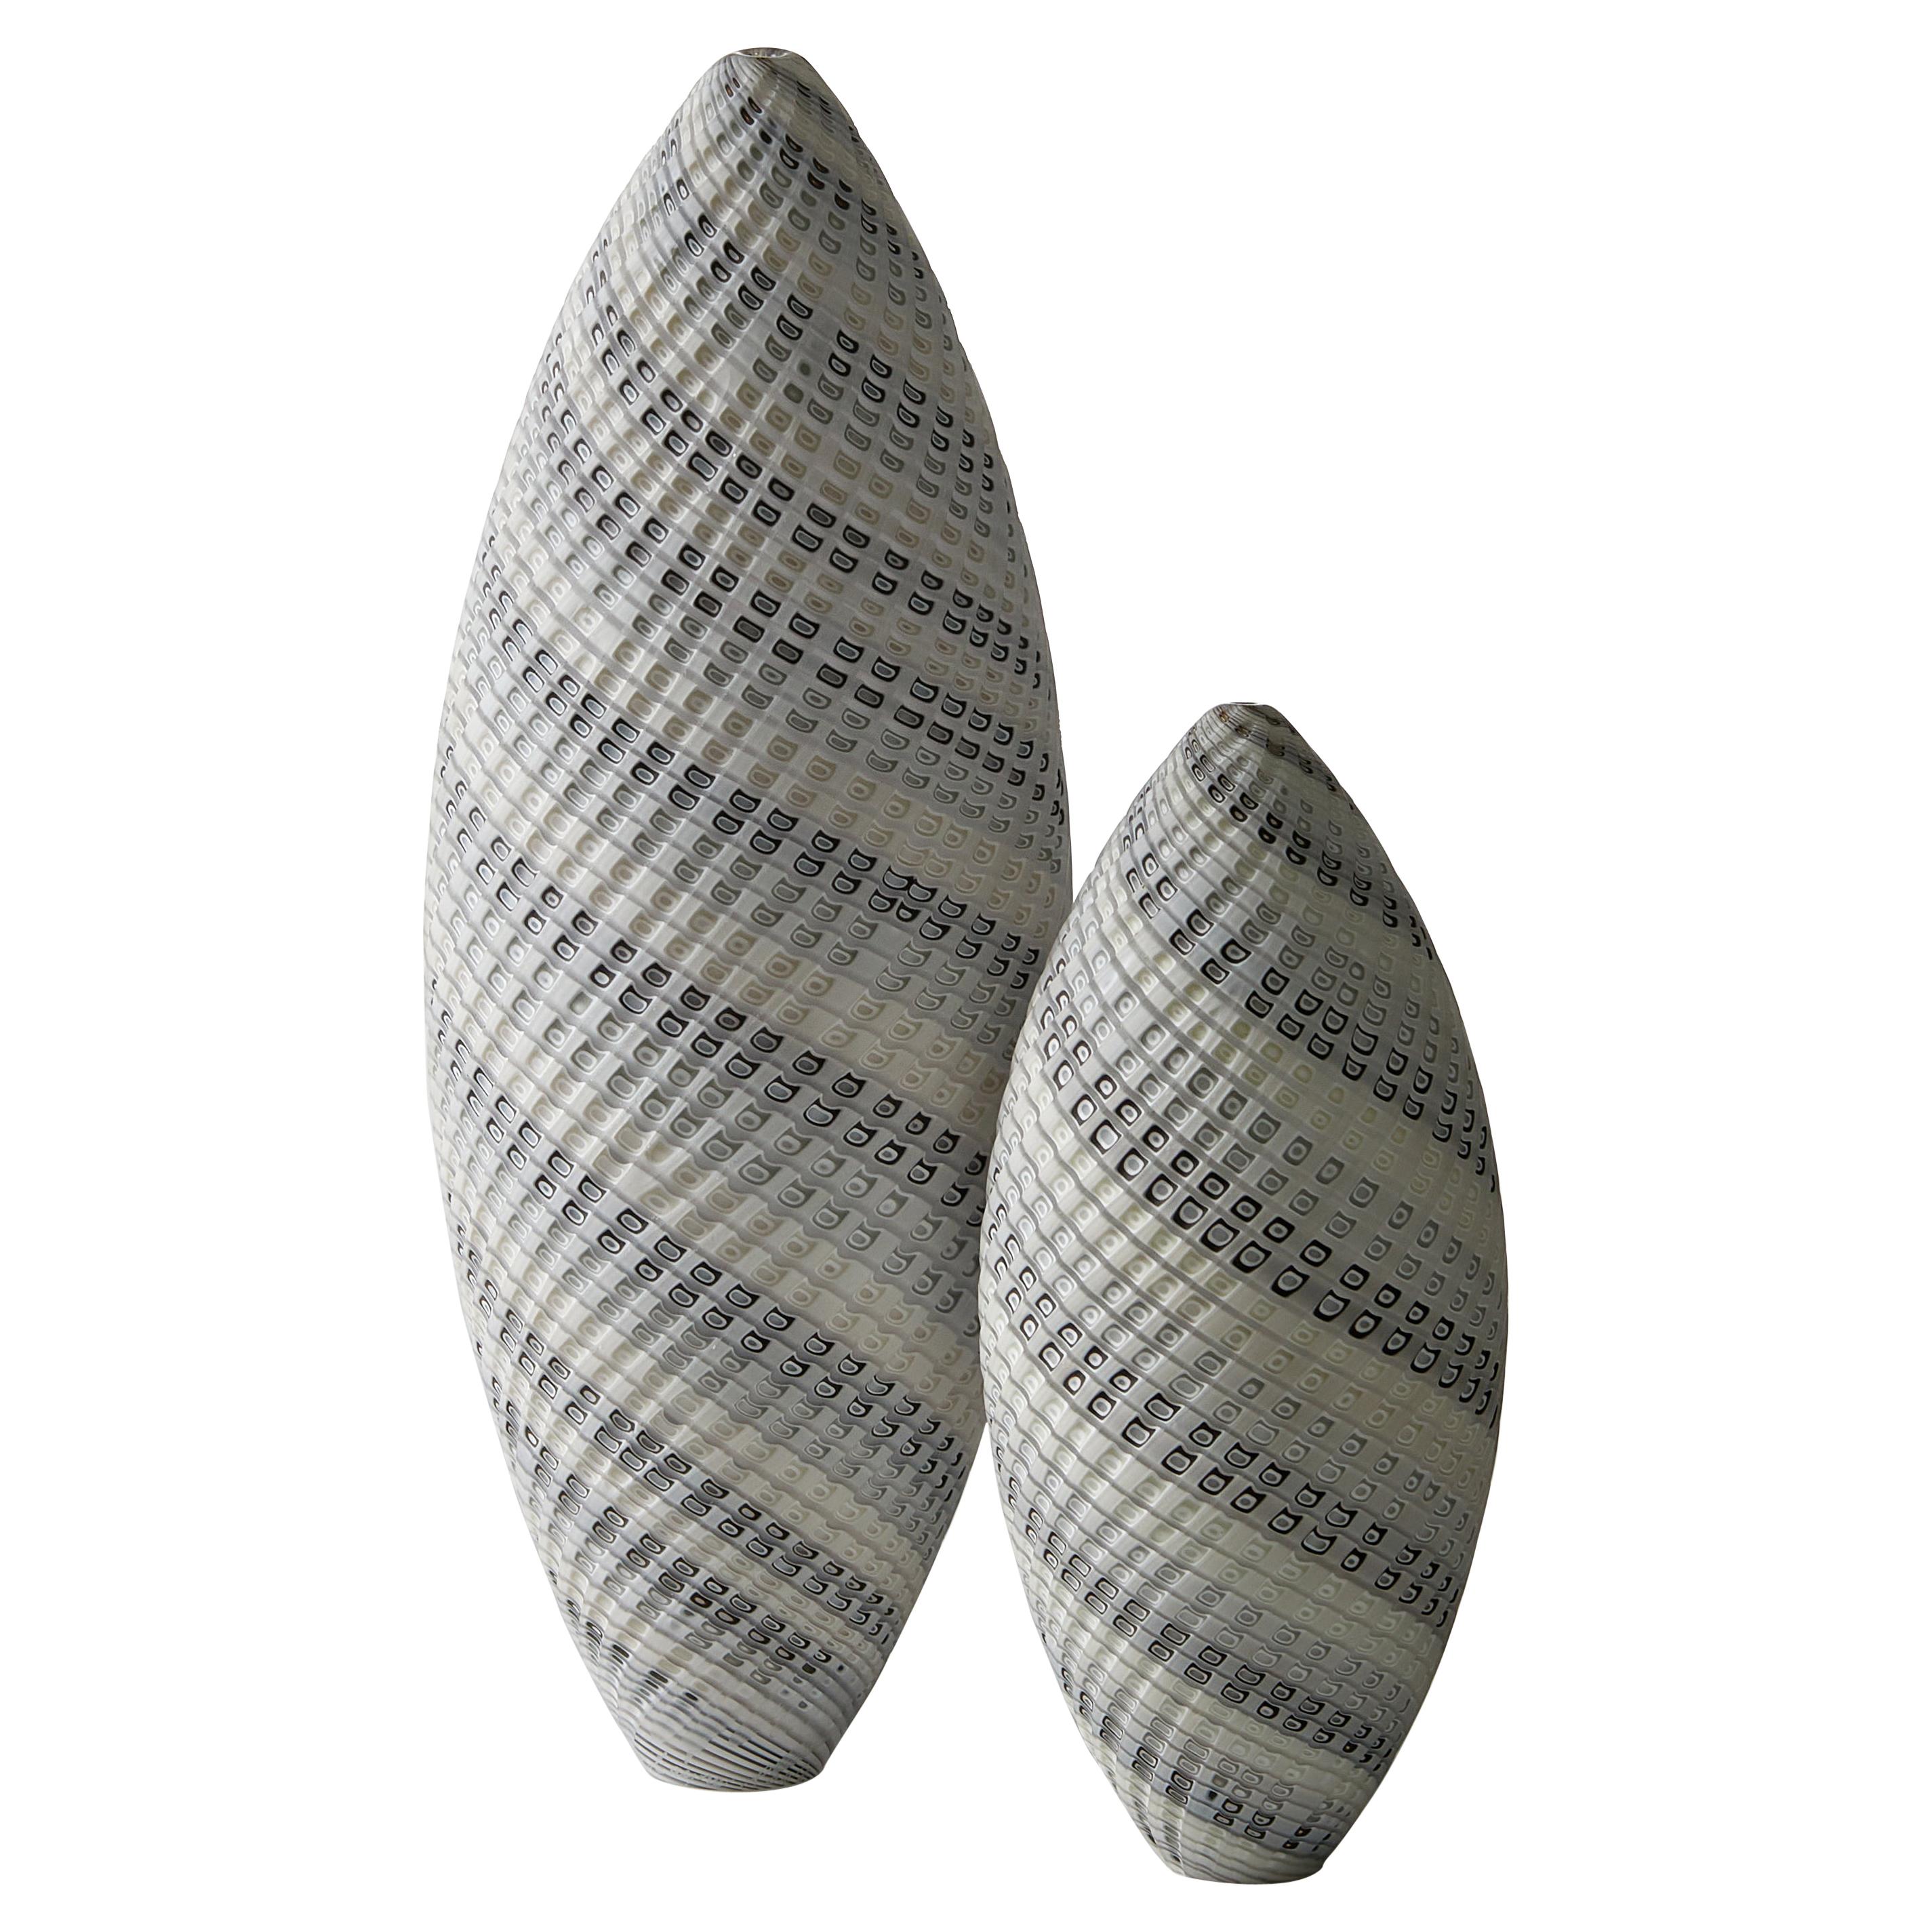 Woven Two-Tone White Pair, an Organic Textured Art Glass Duo by Layne Row